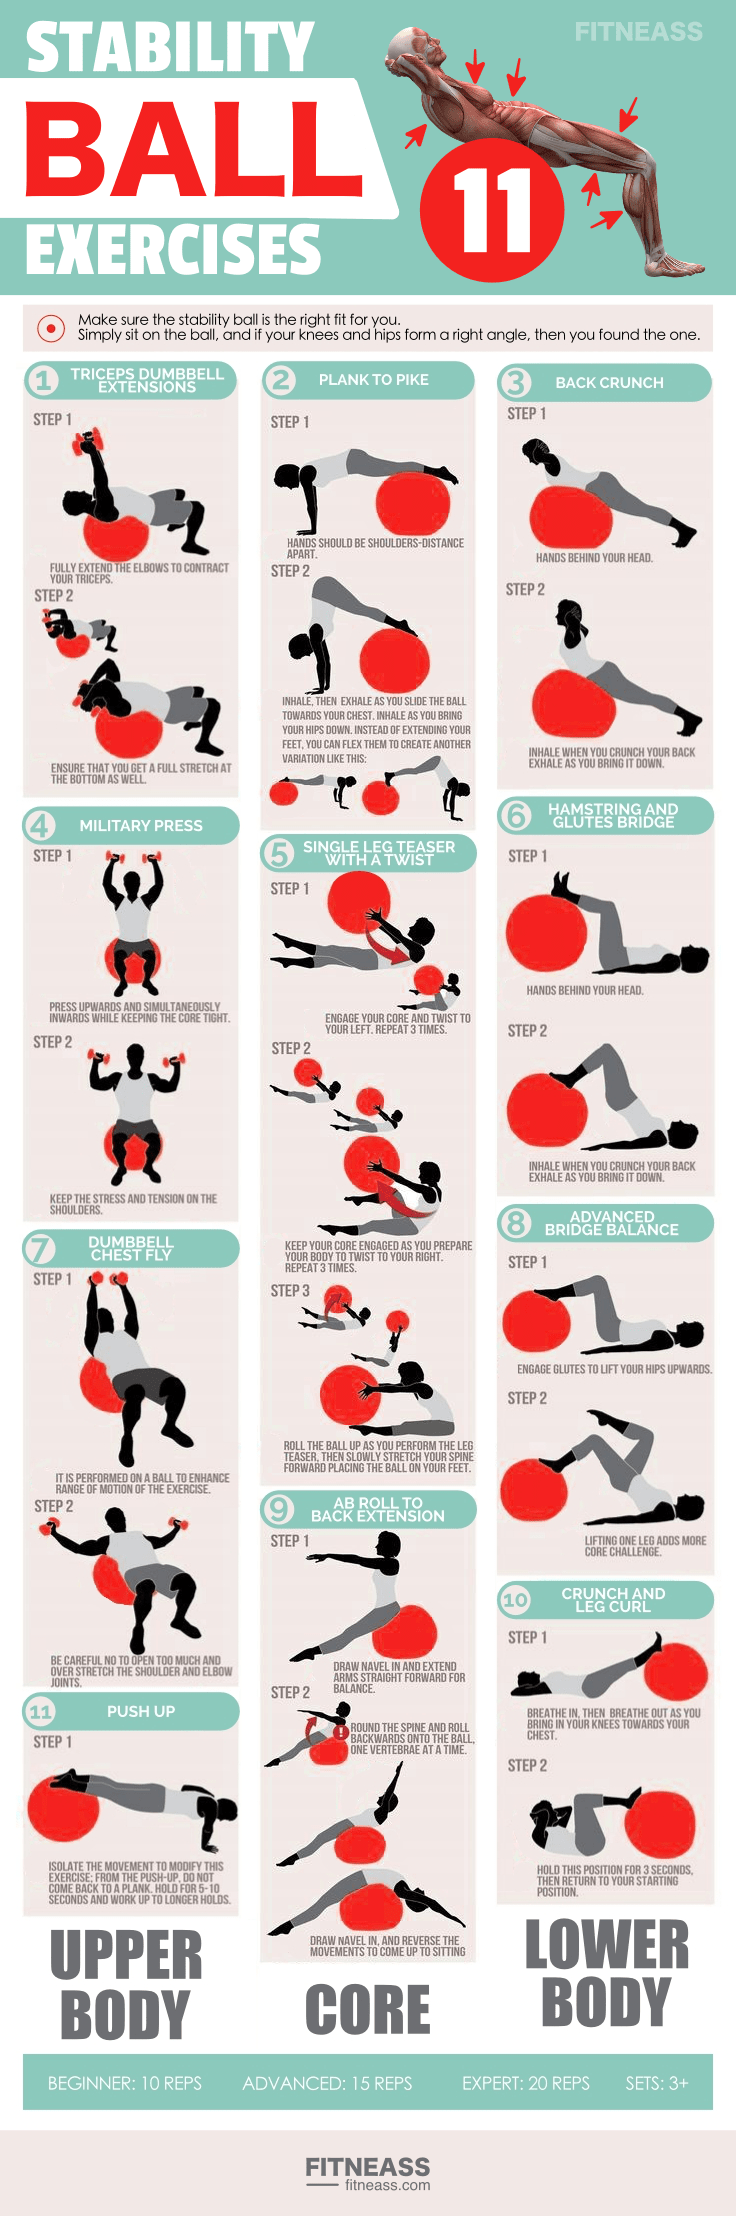 Stability Ball Exercises Infographic